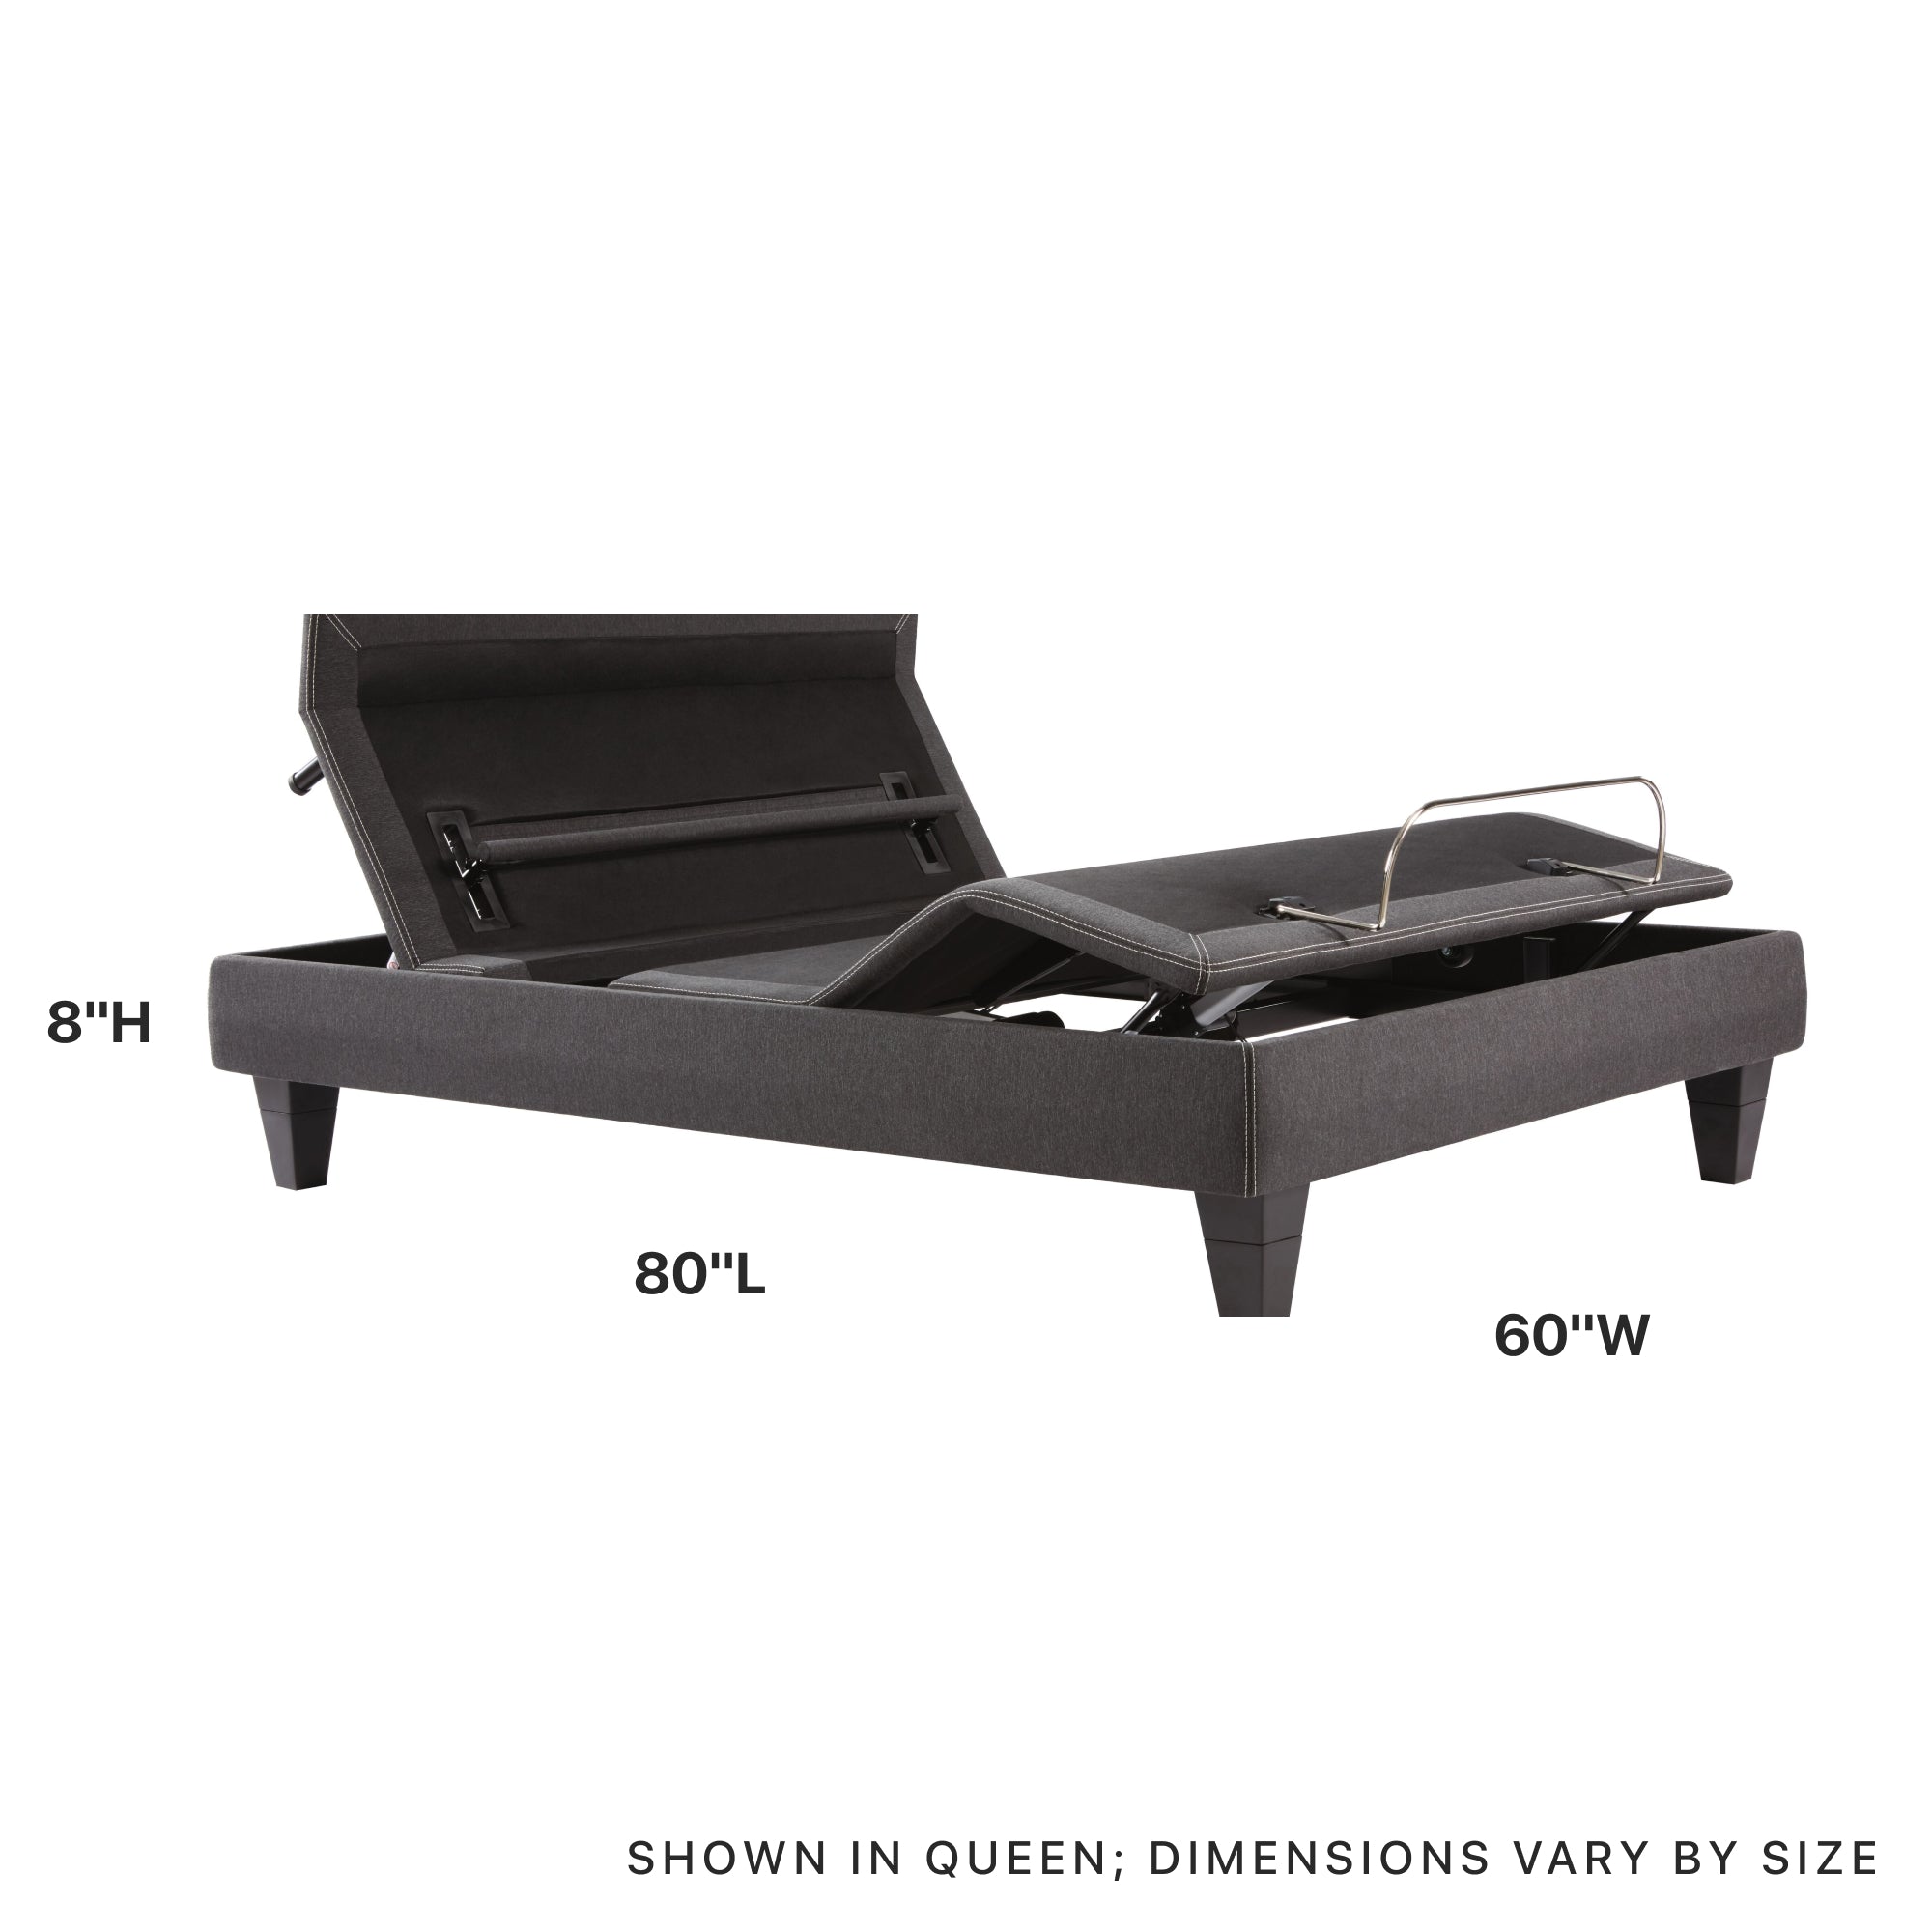 Diagram showing the measurements when raised, for the Beautyrest Black Luxury Base